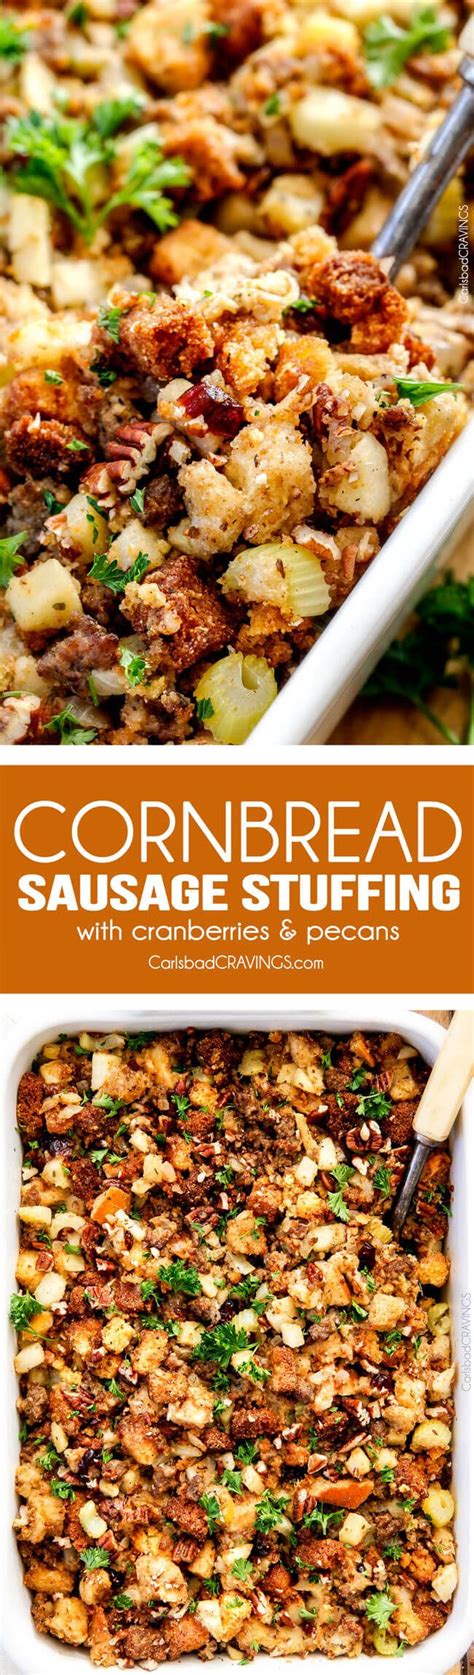 Cornbread Sausage Stuffing With Cranberries And Pecans